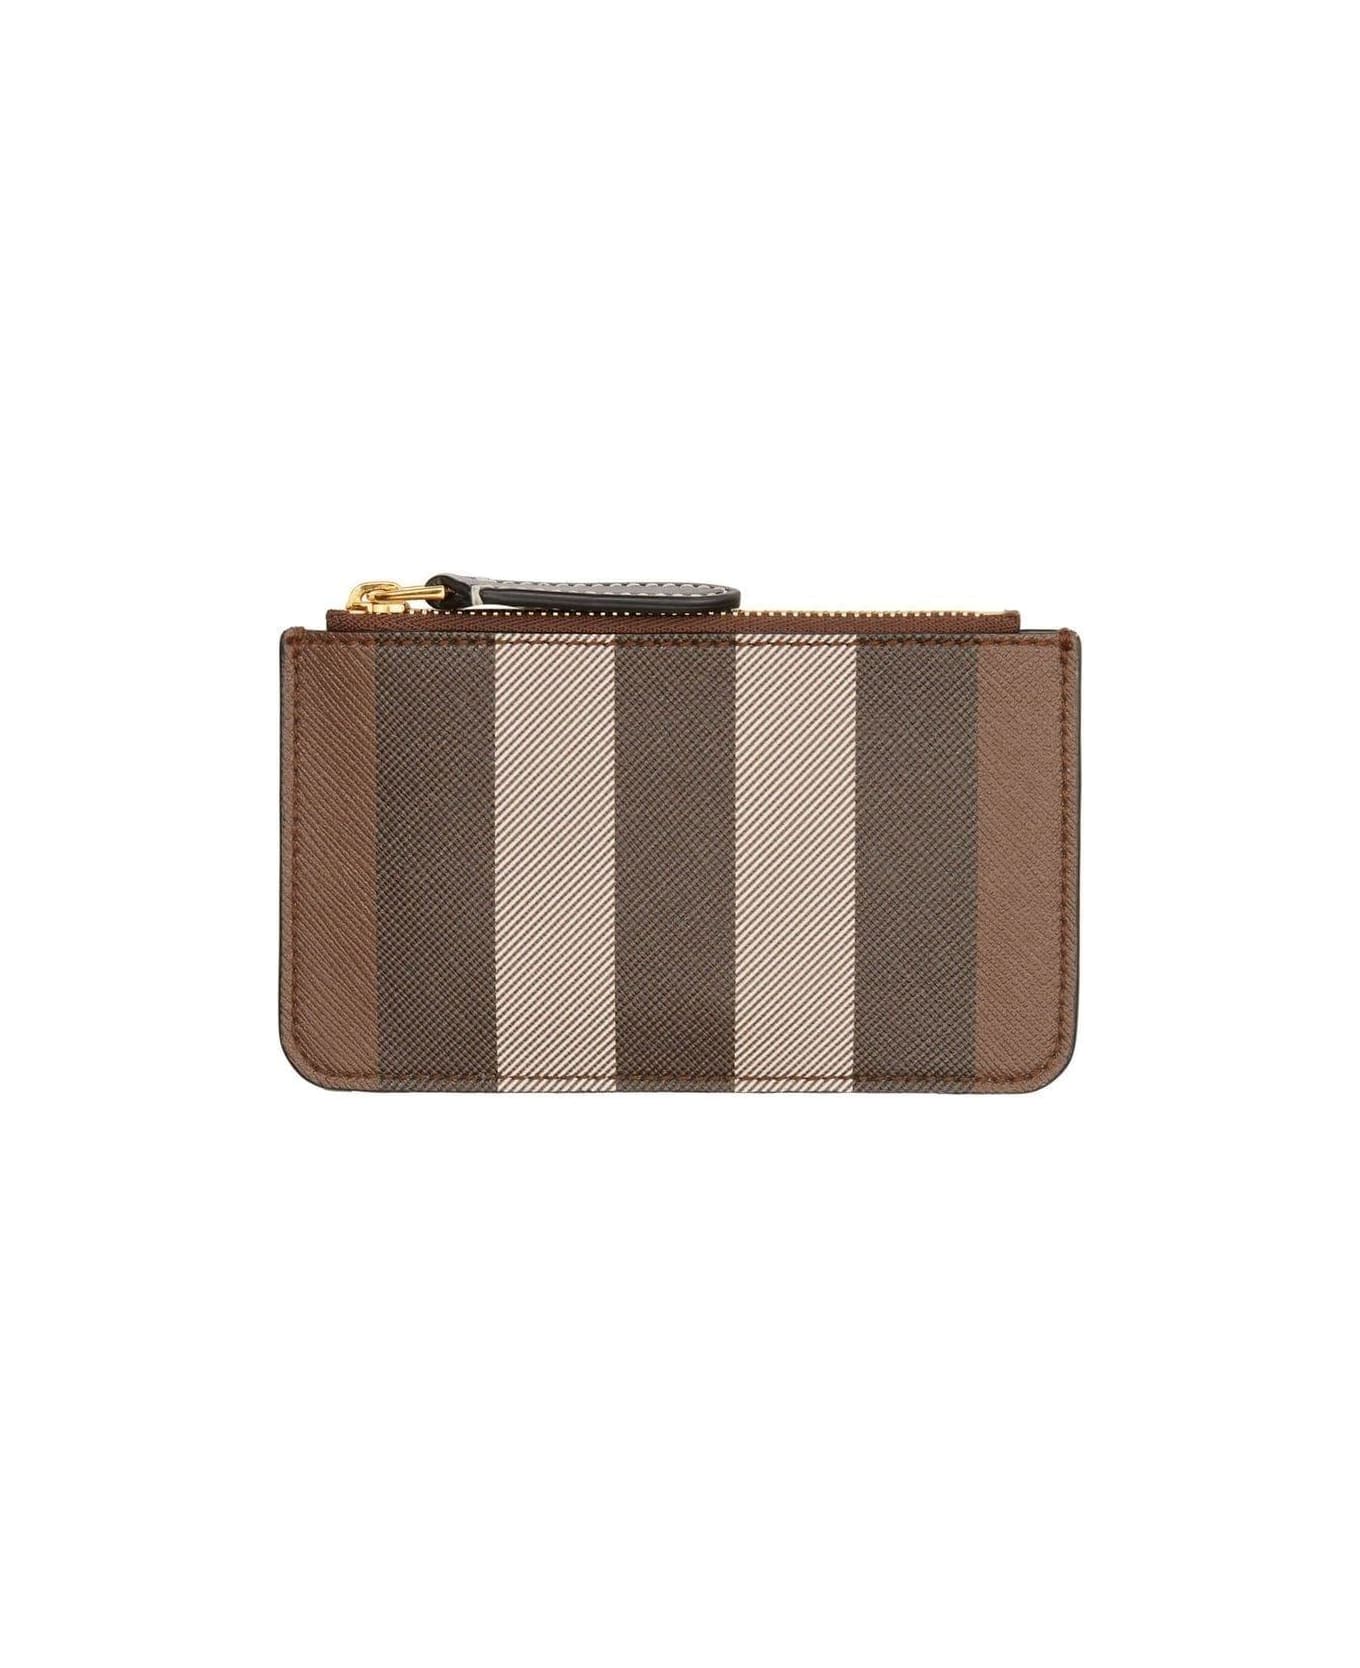 Burberry Striped Zipped Wallet - Brown